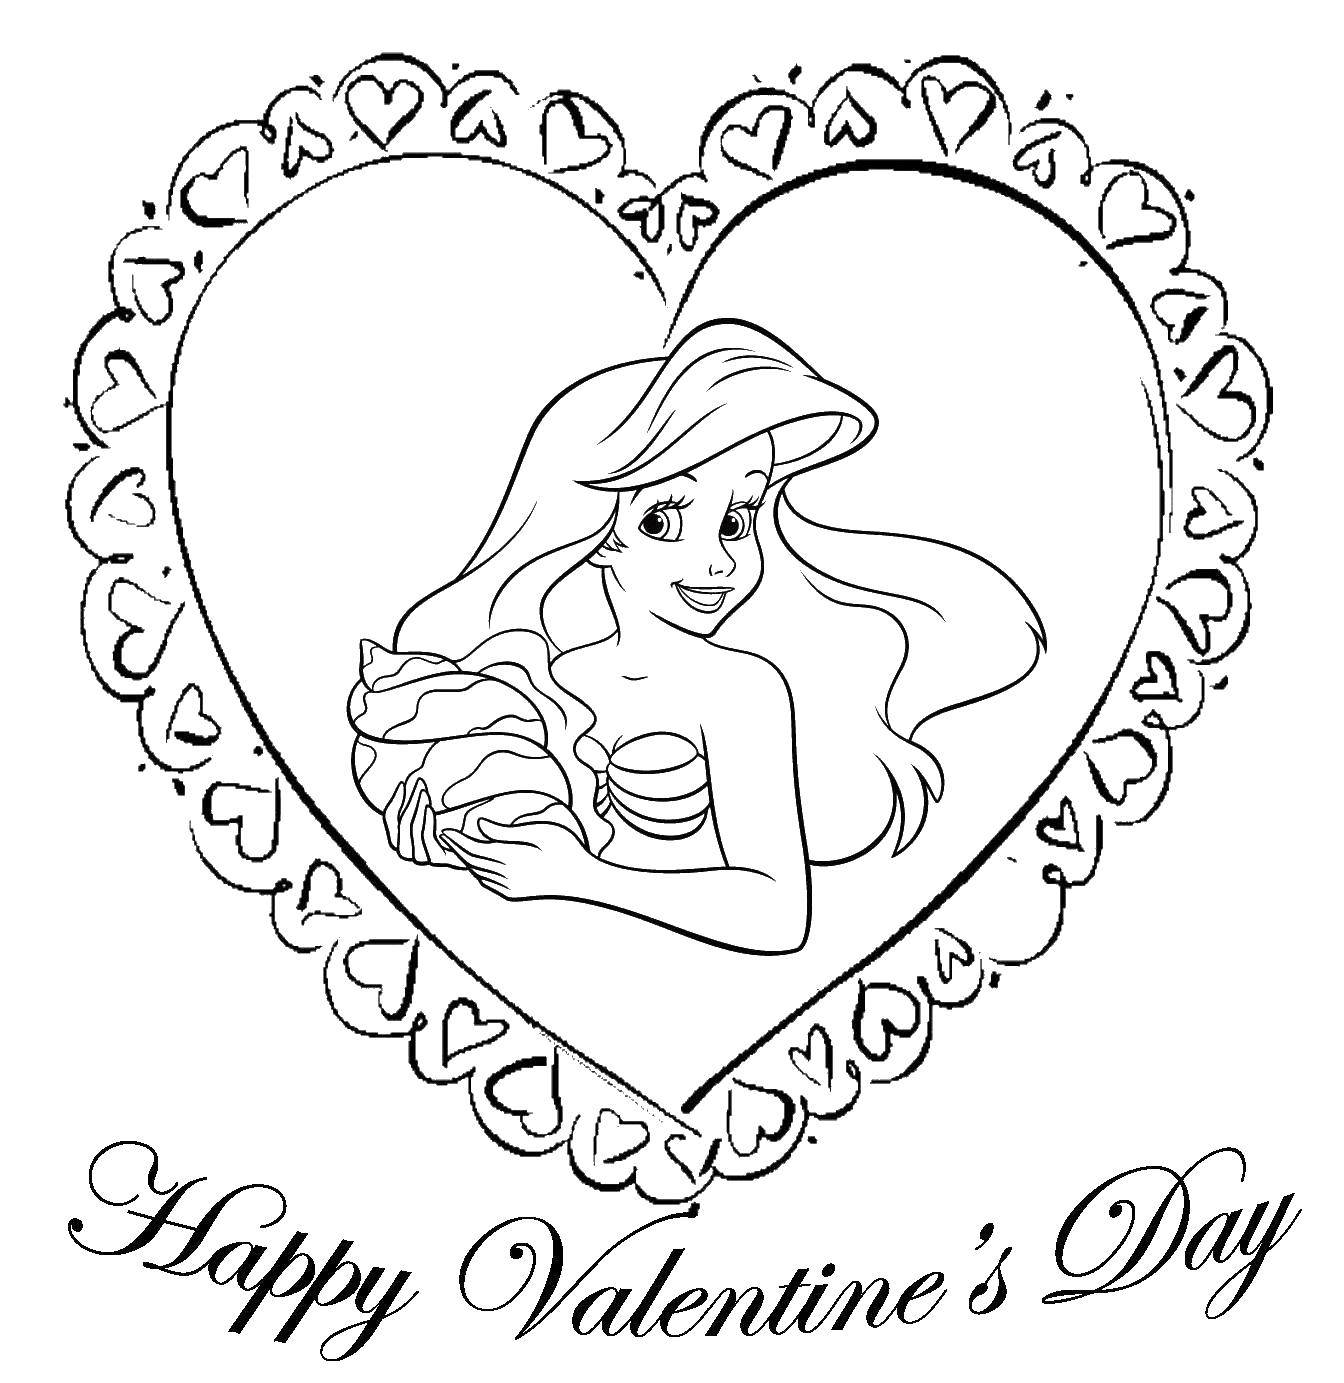 Coloring Greetings from Ariel. Category greetings. Tags:  greetings.